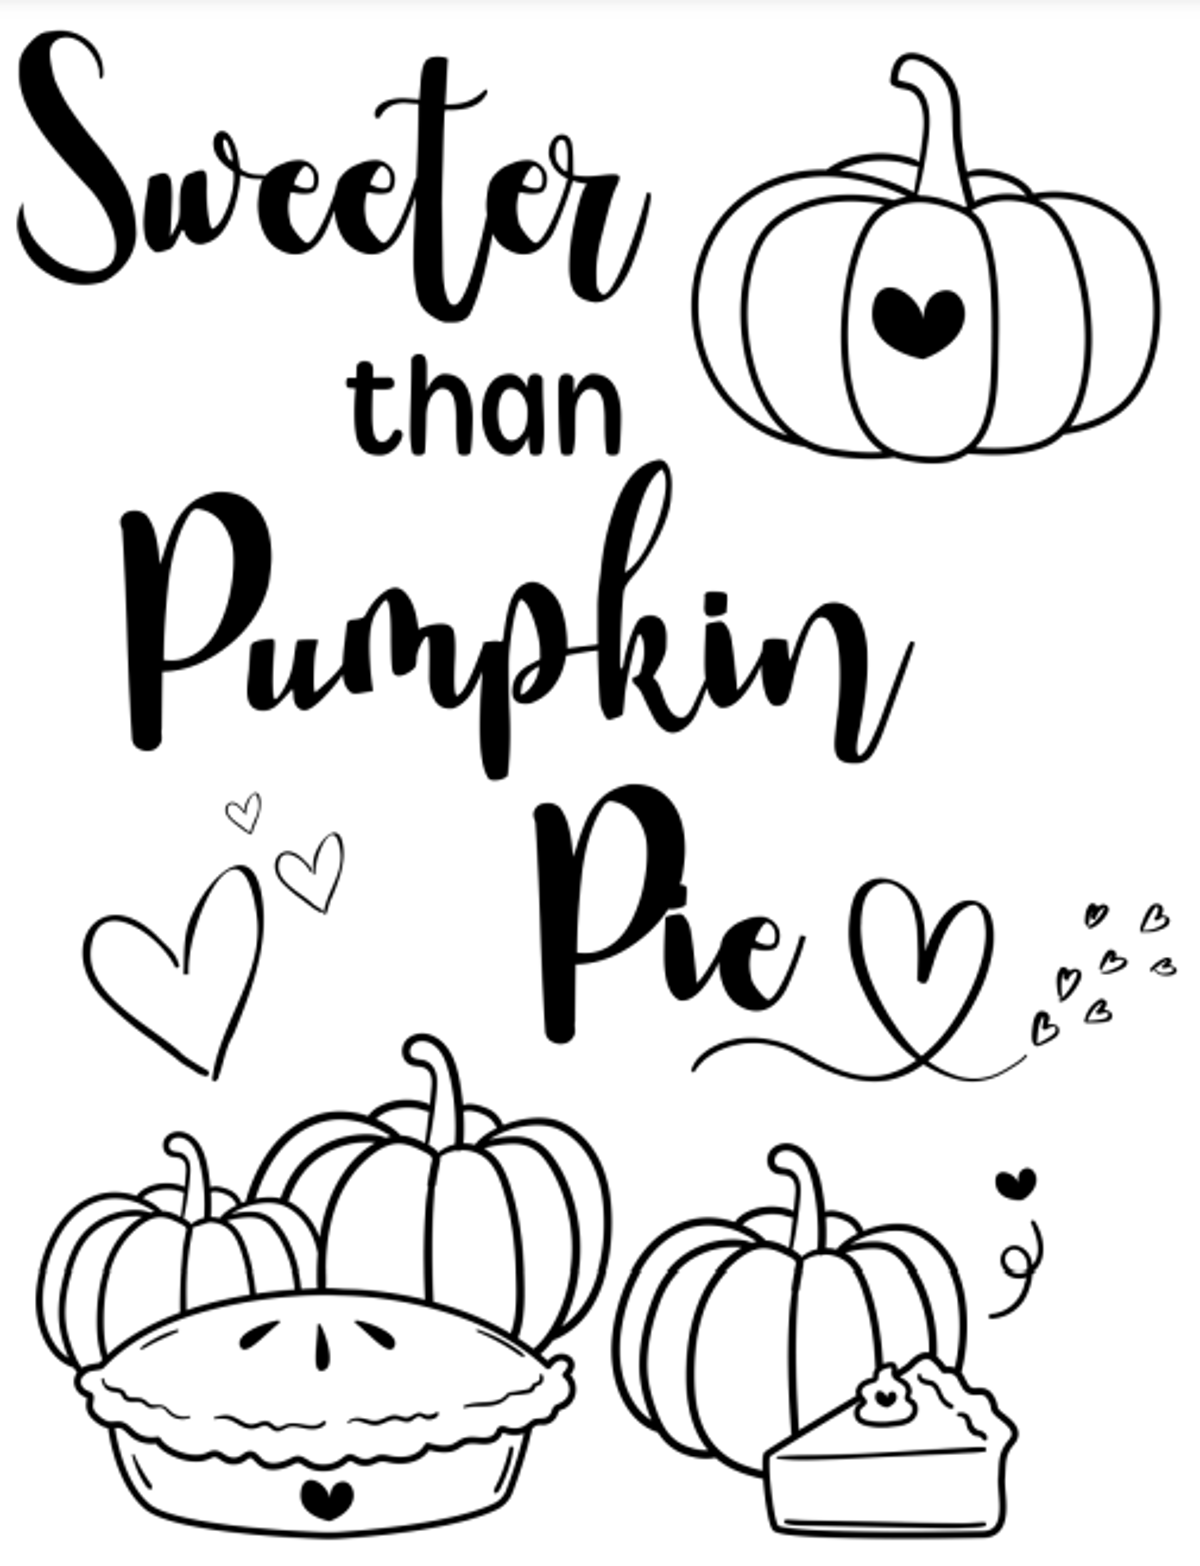 Cute pumpkin coloring pages for fall